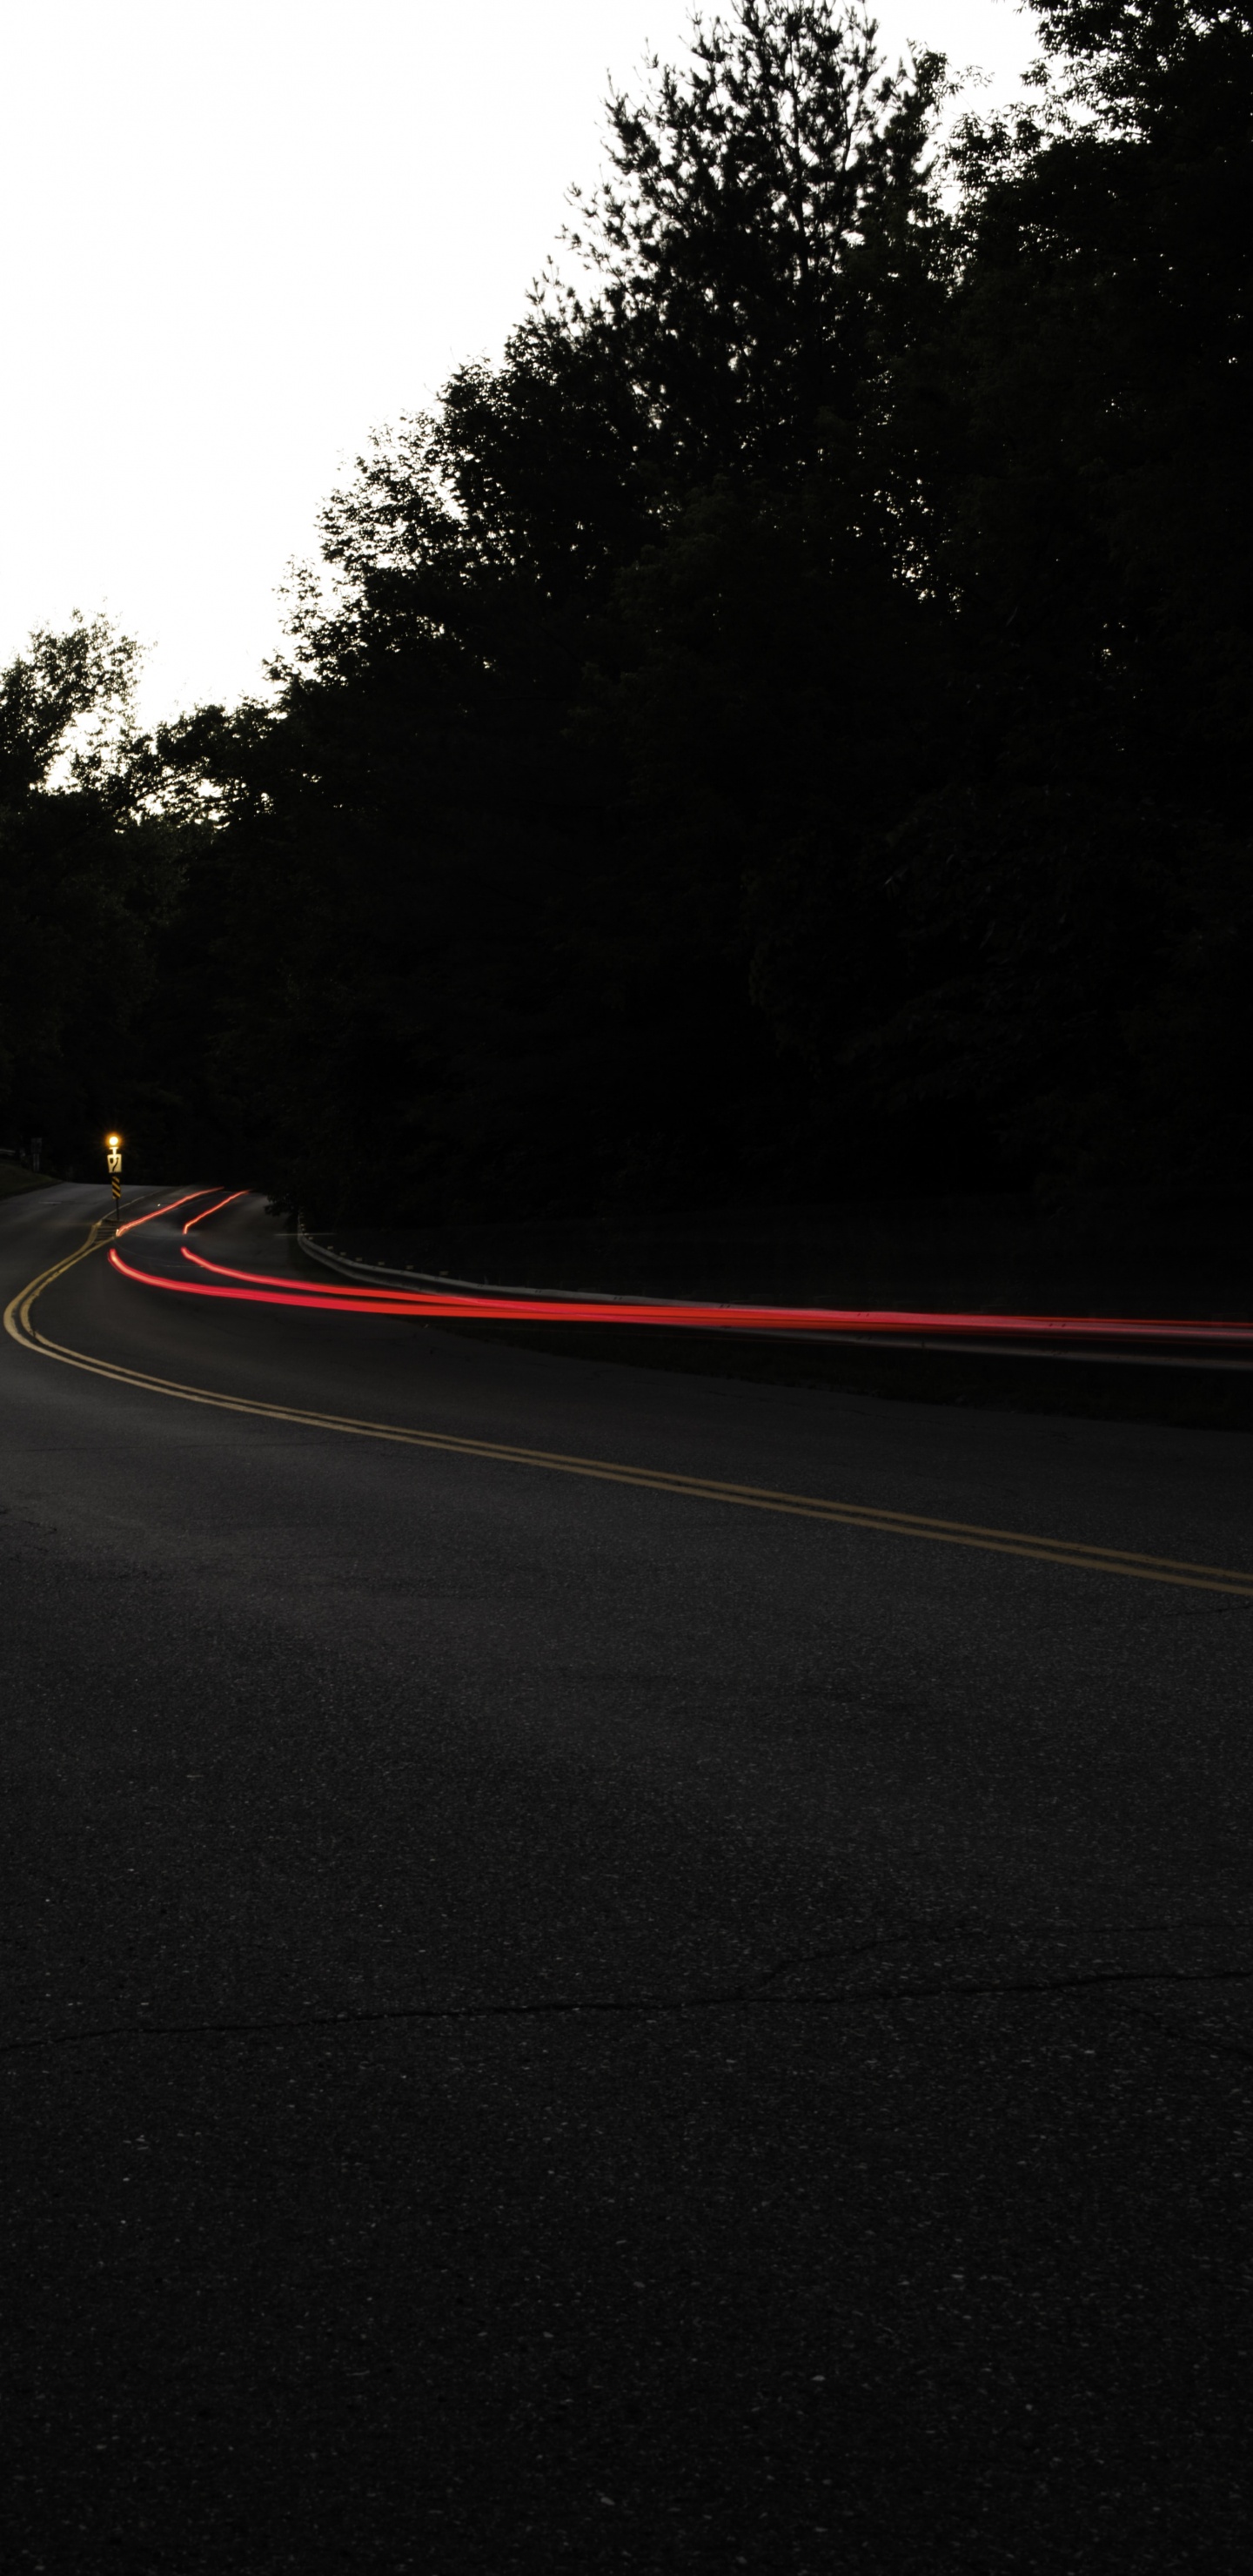 Time Lapse Photography of Road During Night Time. Wallpaper in 1440x2960 Resolution